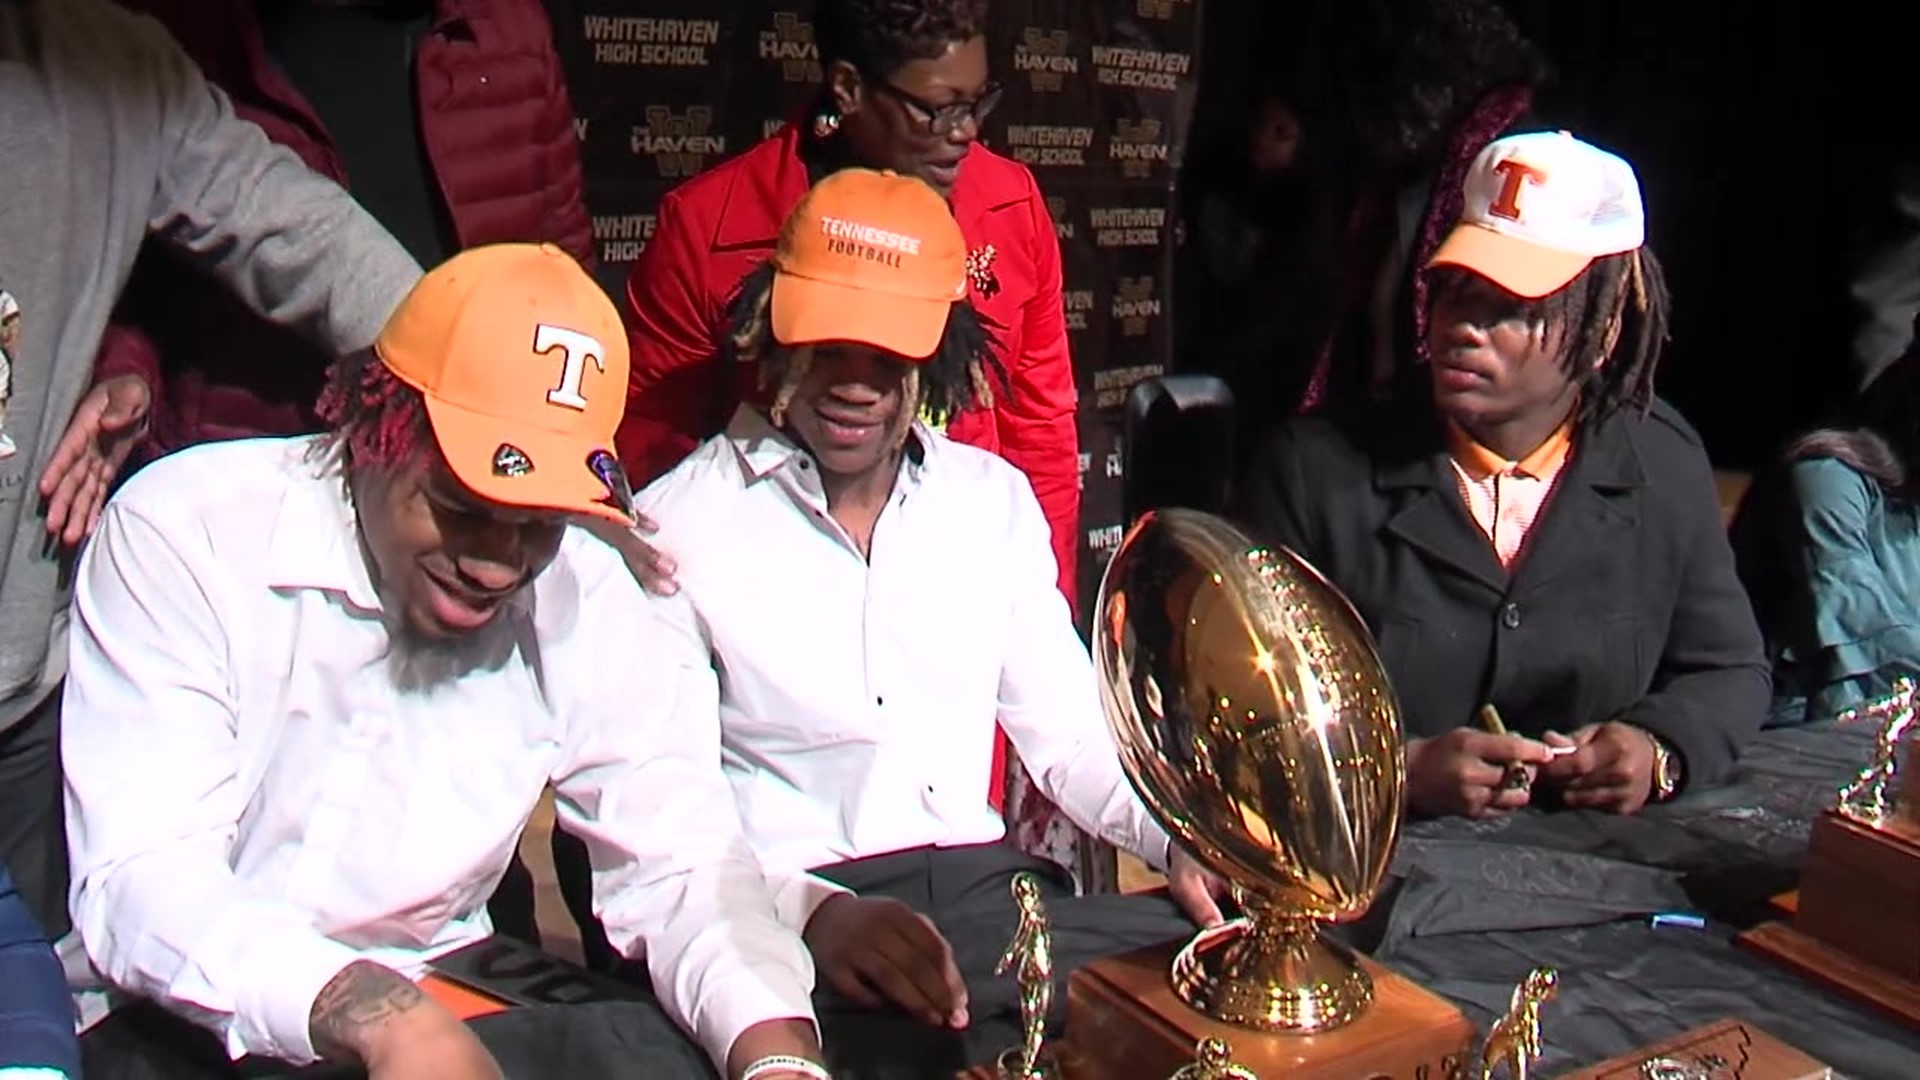 Trio of Whitehaven linebackers sign with the University of Tennessee Vols